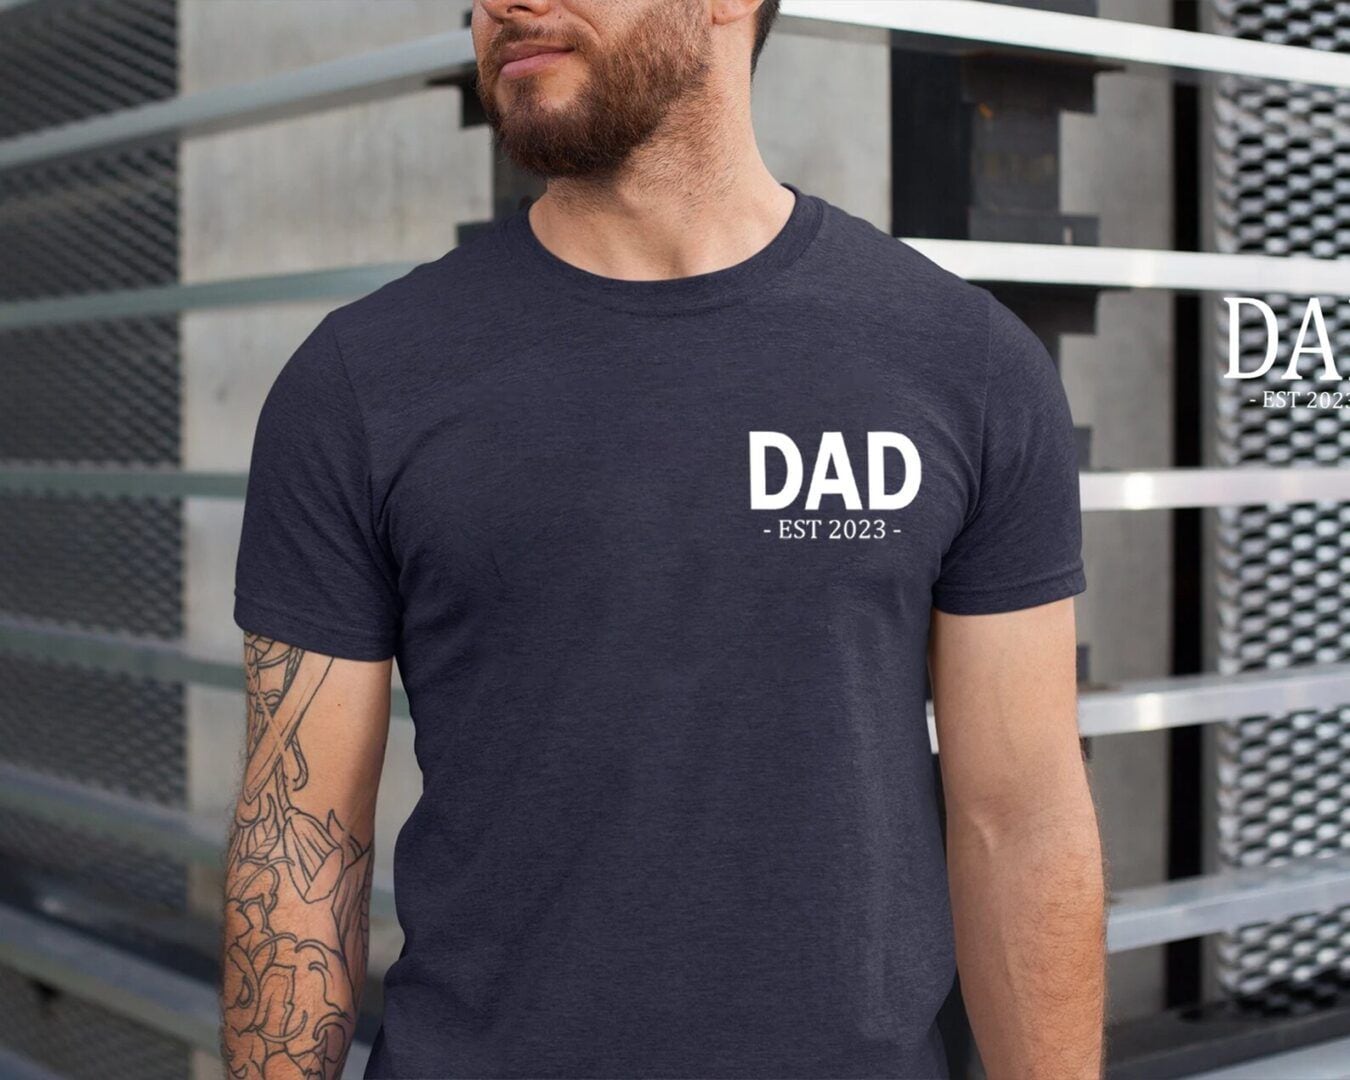 The 10 best gifts for new dads